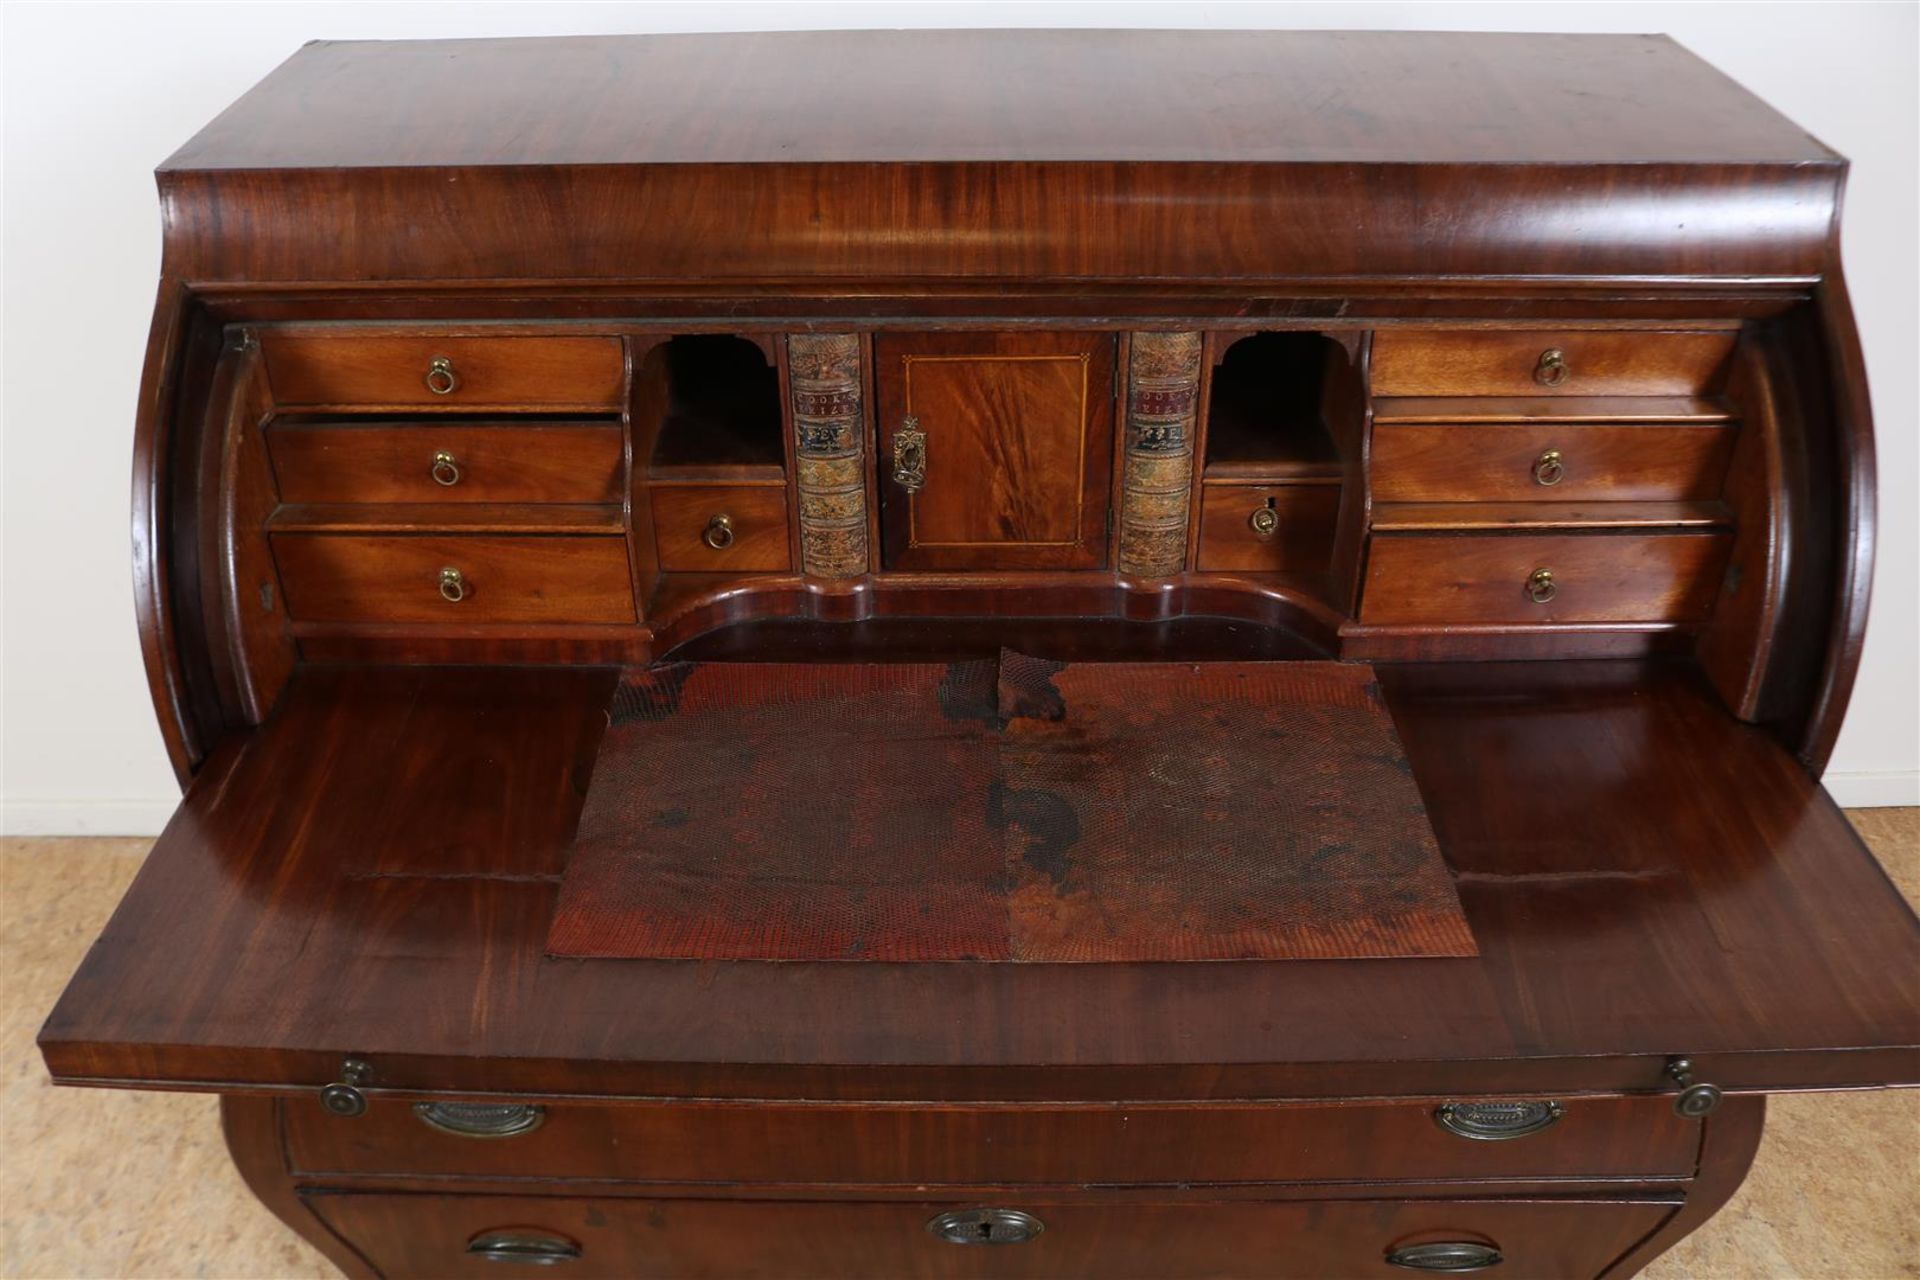 Mahogany Louis XVI roll-top desk with interior of 9 drawers, 2 hidden storage compartments behind - Image 3 of 5